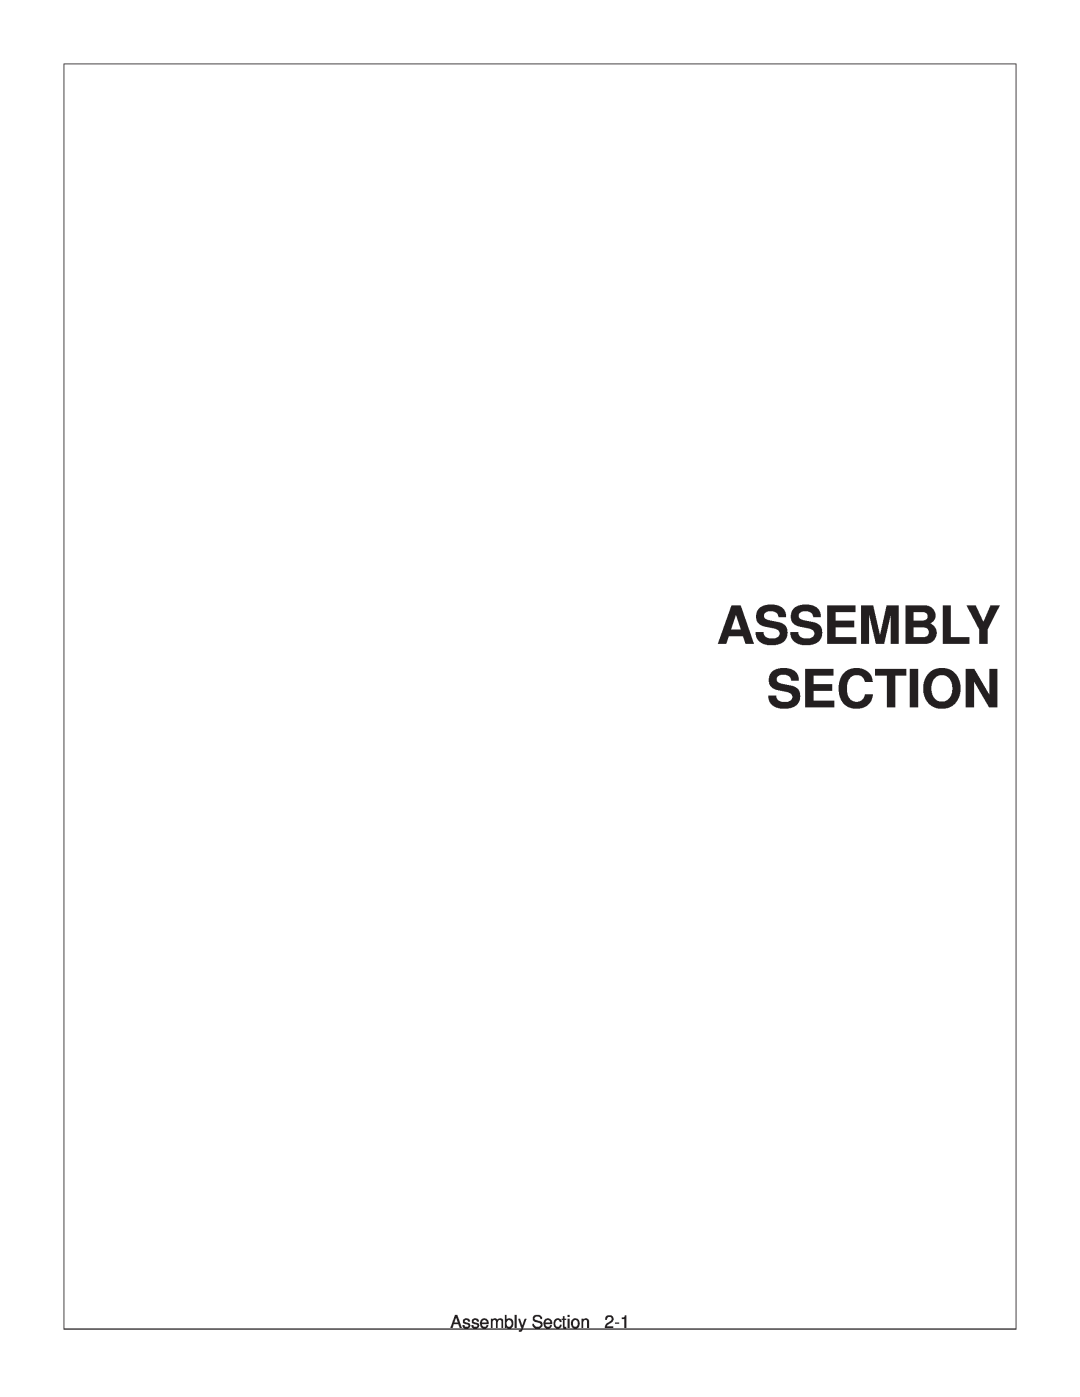 Tiger Products Co., Ltd 6020009 manual Assembly Section 